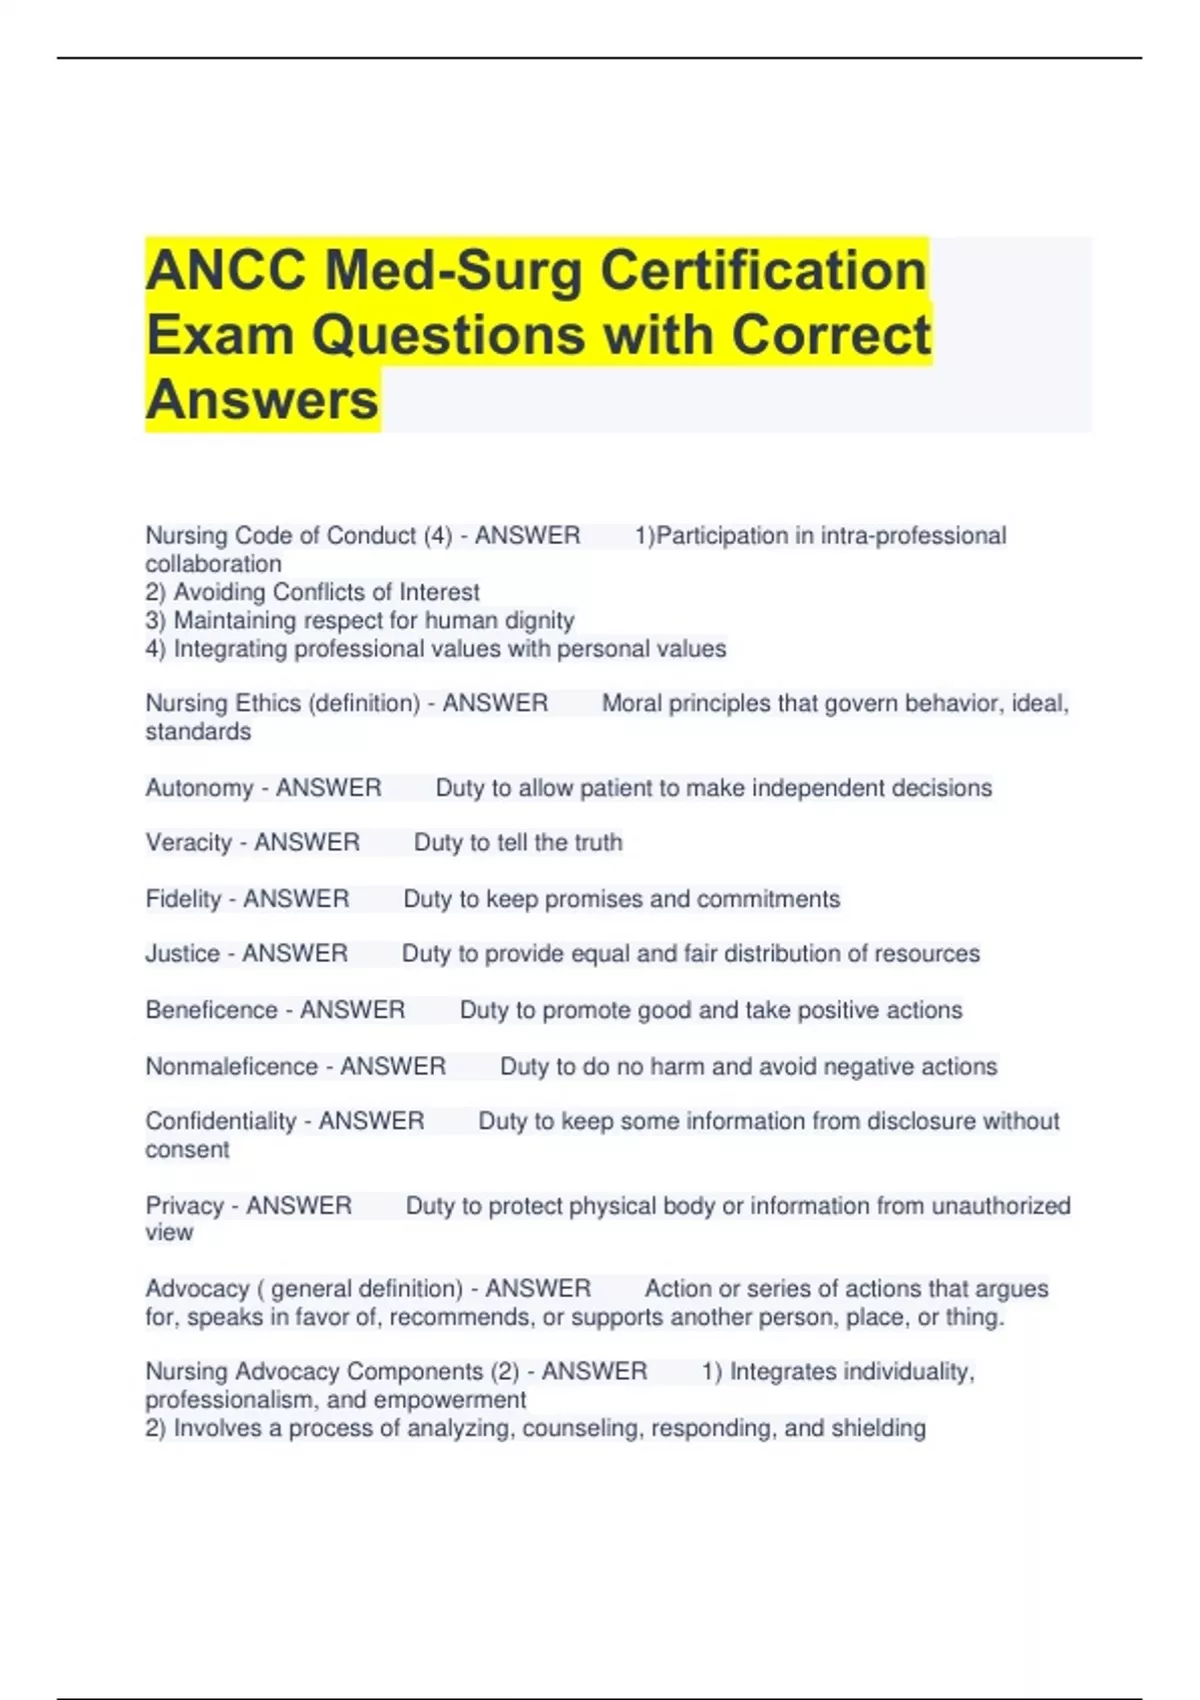 ANCC Med Surg Certification Exam Questions with Correct Answers ANCC